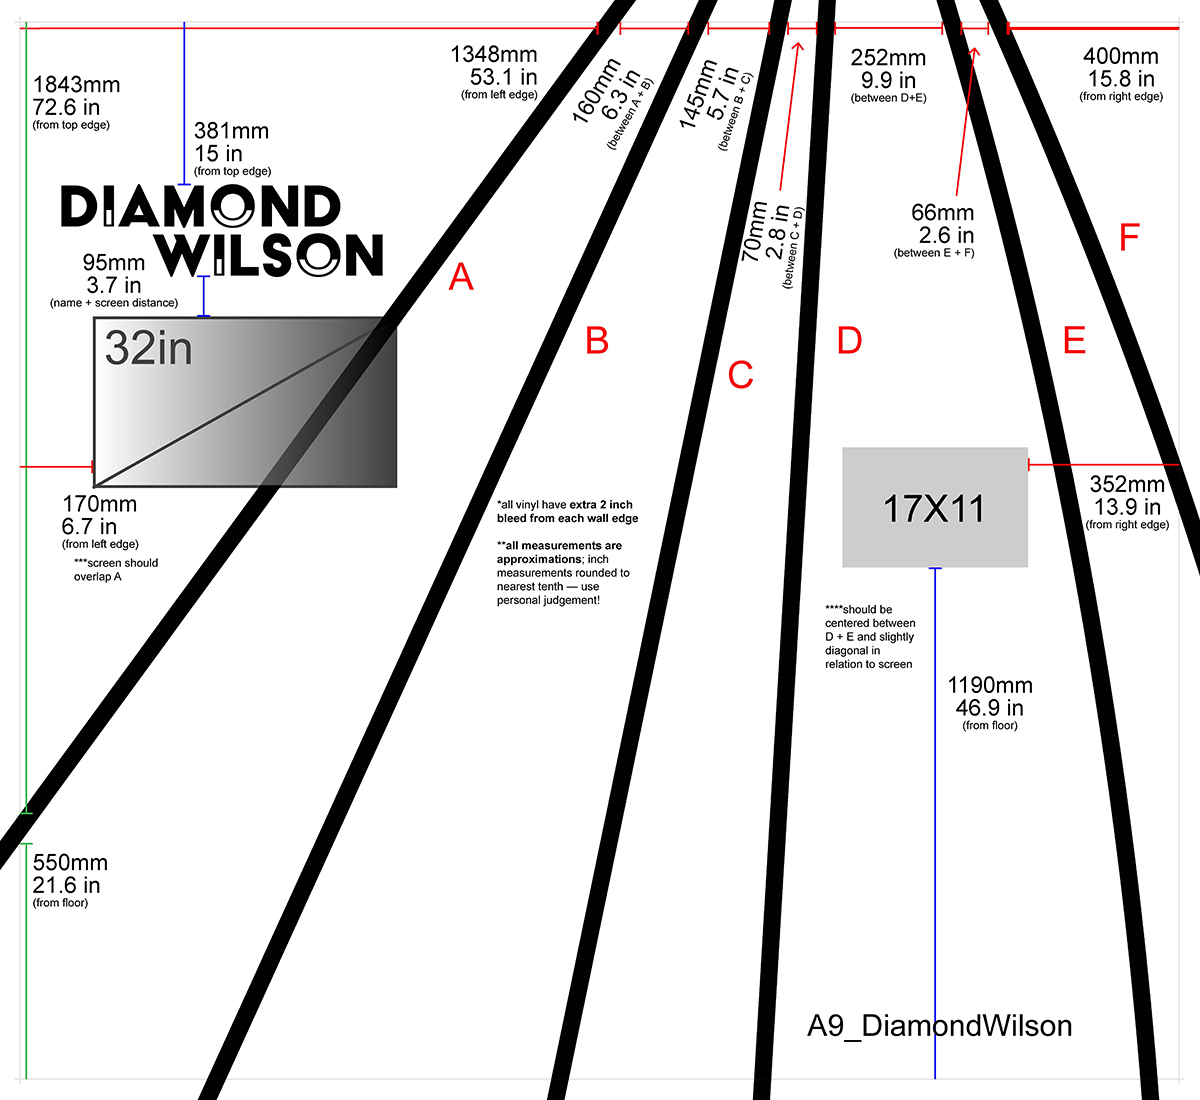 A placement guide for Diamond Wilson's exhibition wall with measurements in millimeters and inches, the vinyl design, and placeholders for a digital screen and artist didactic. The vinyl design features the artist name and long black lines coming down diagonally from the top in a fan-like shape.